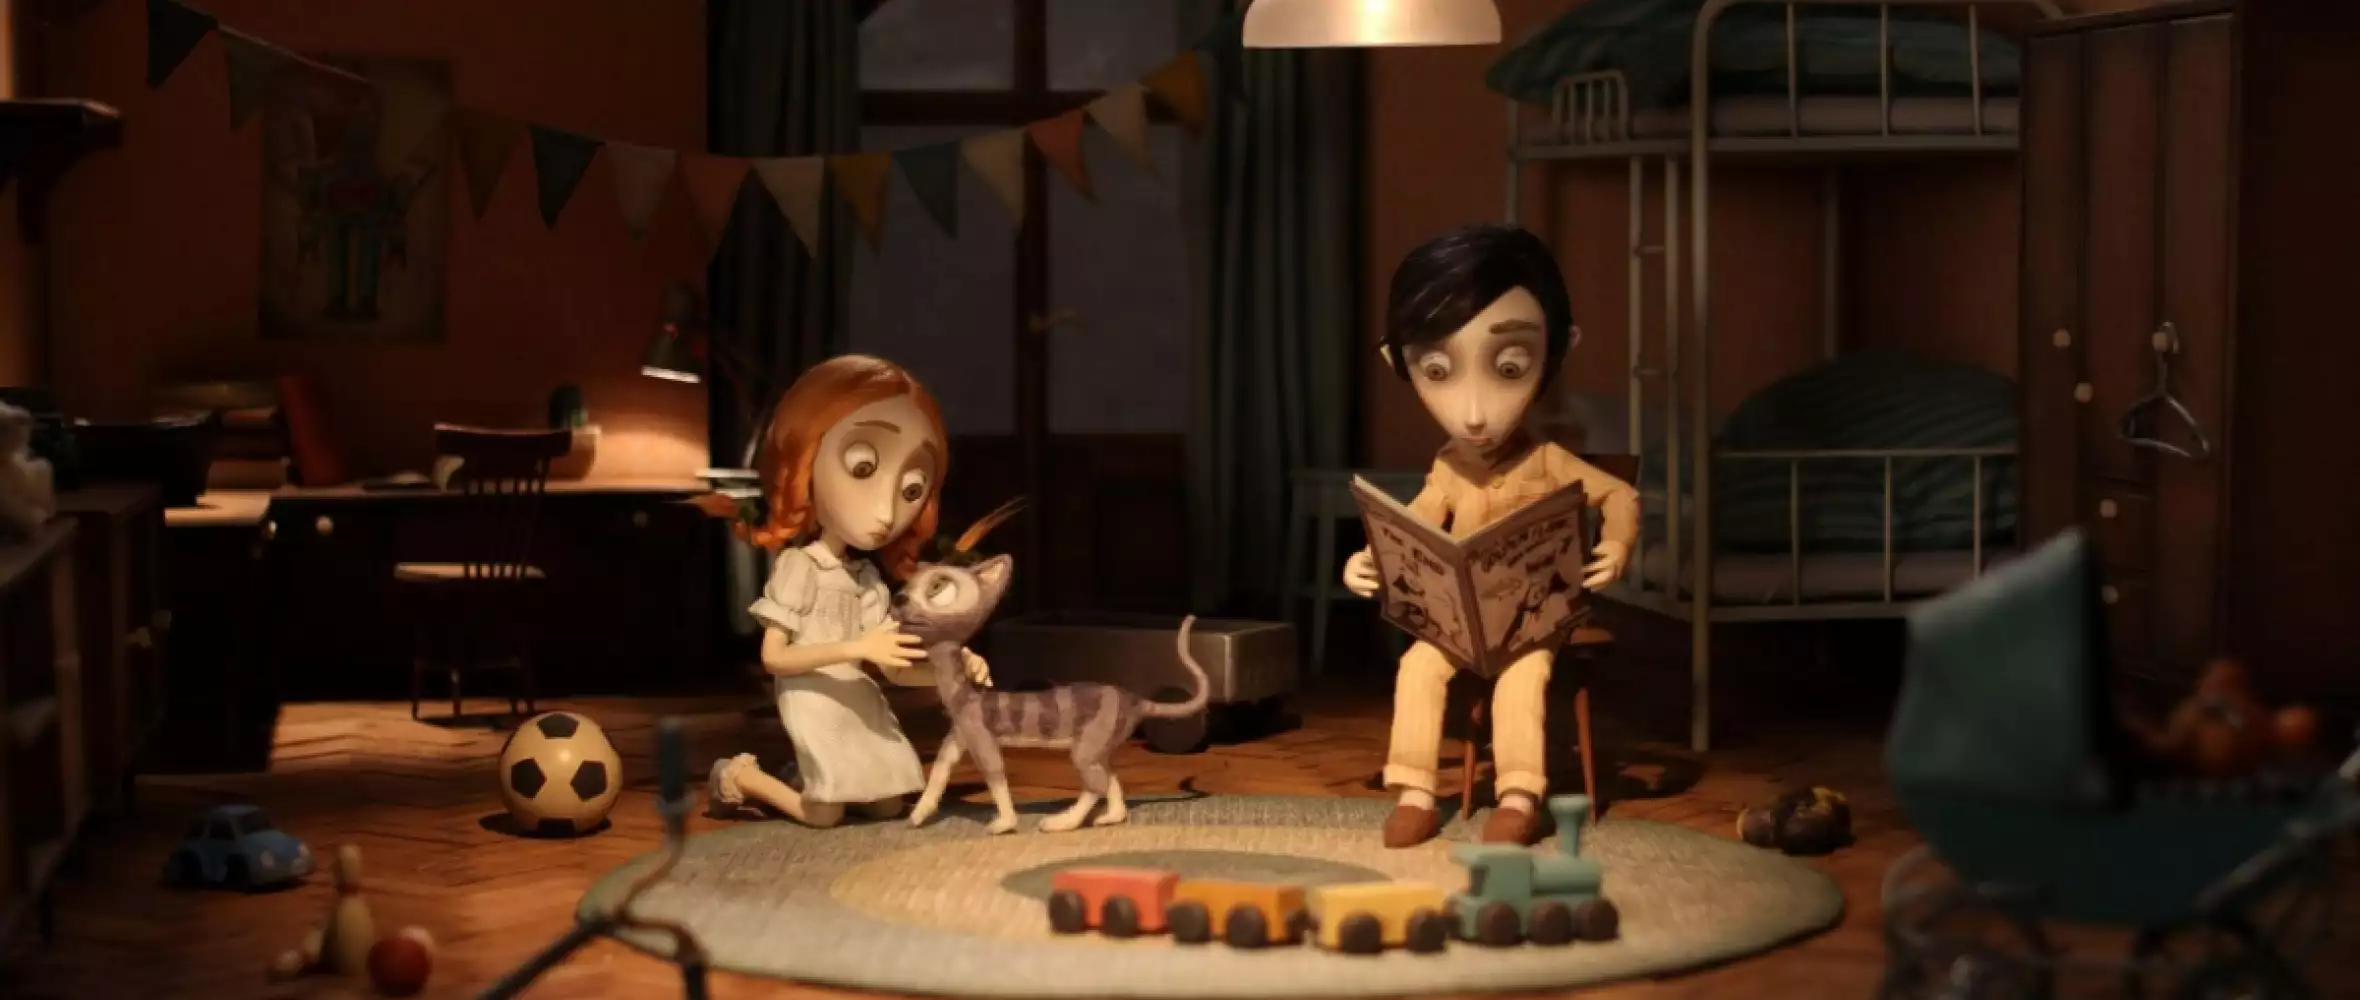 Co-production Is the Lifeblood of Czech Animation